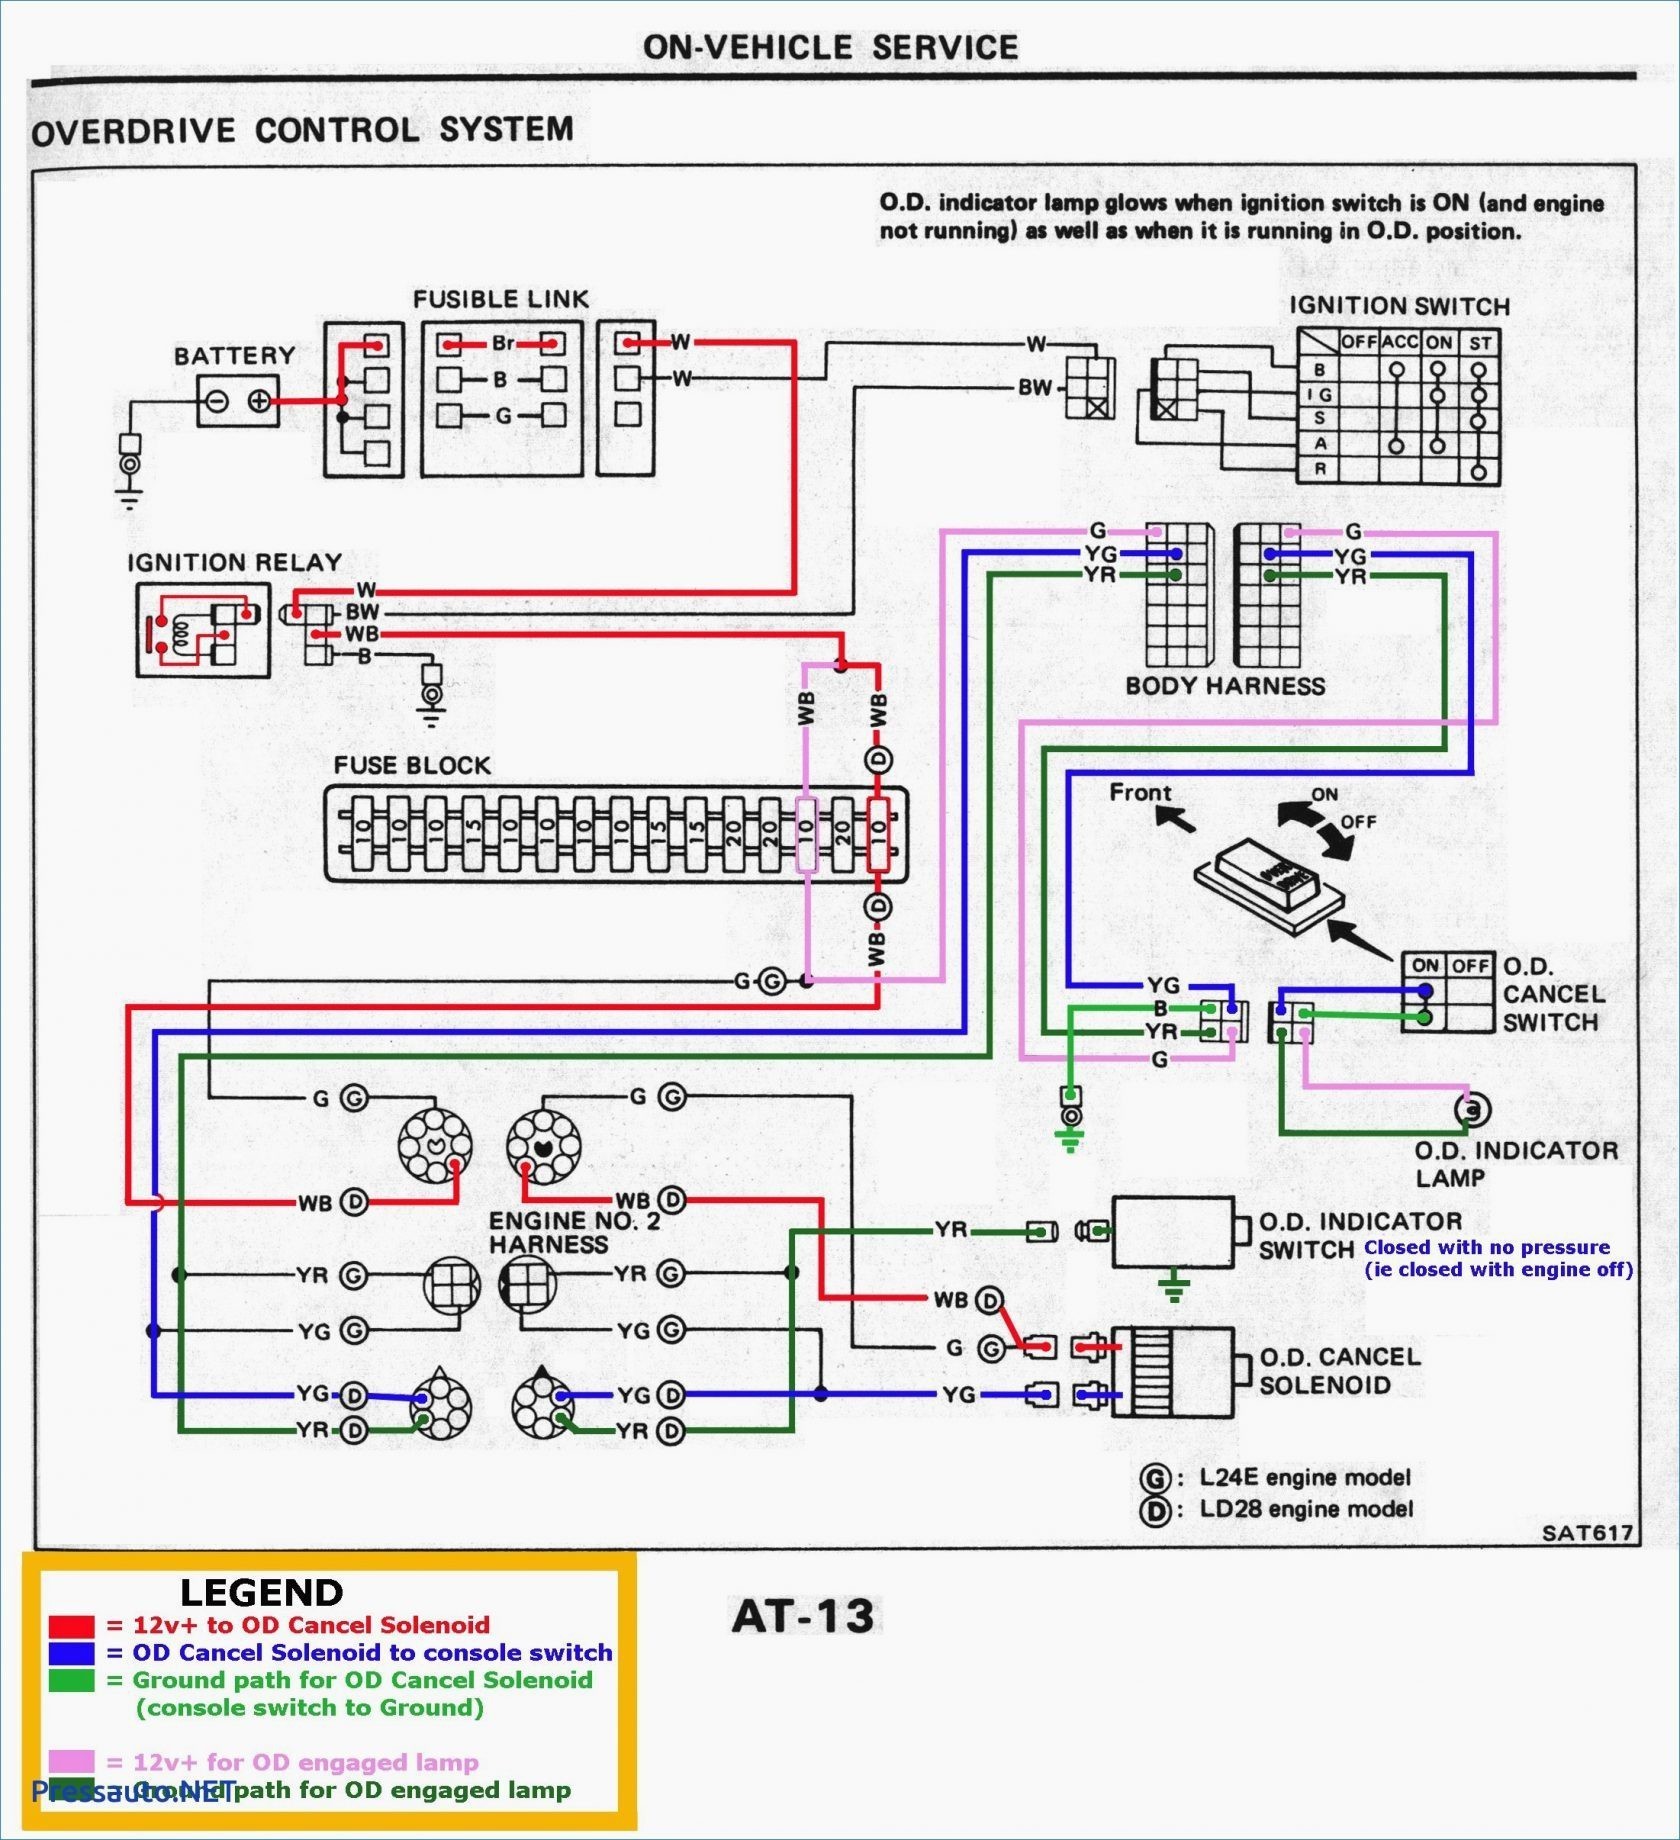 2001 Chevy S10 Engine Diagram 2001 Chevy S10 Ac Wiring Diagram Of 2001 Chevy S10 Engine Diagram